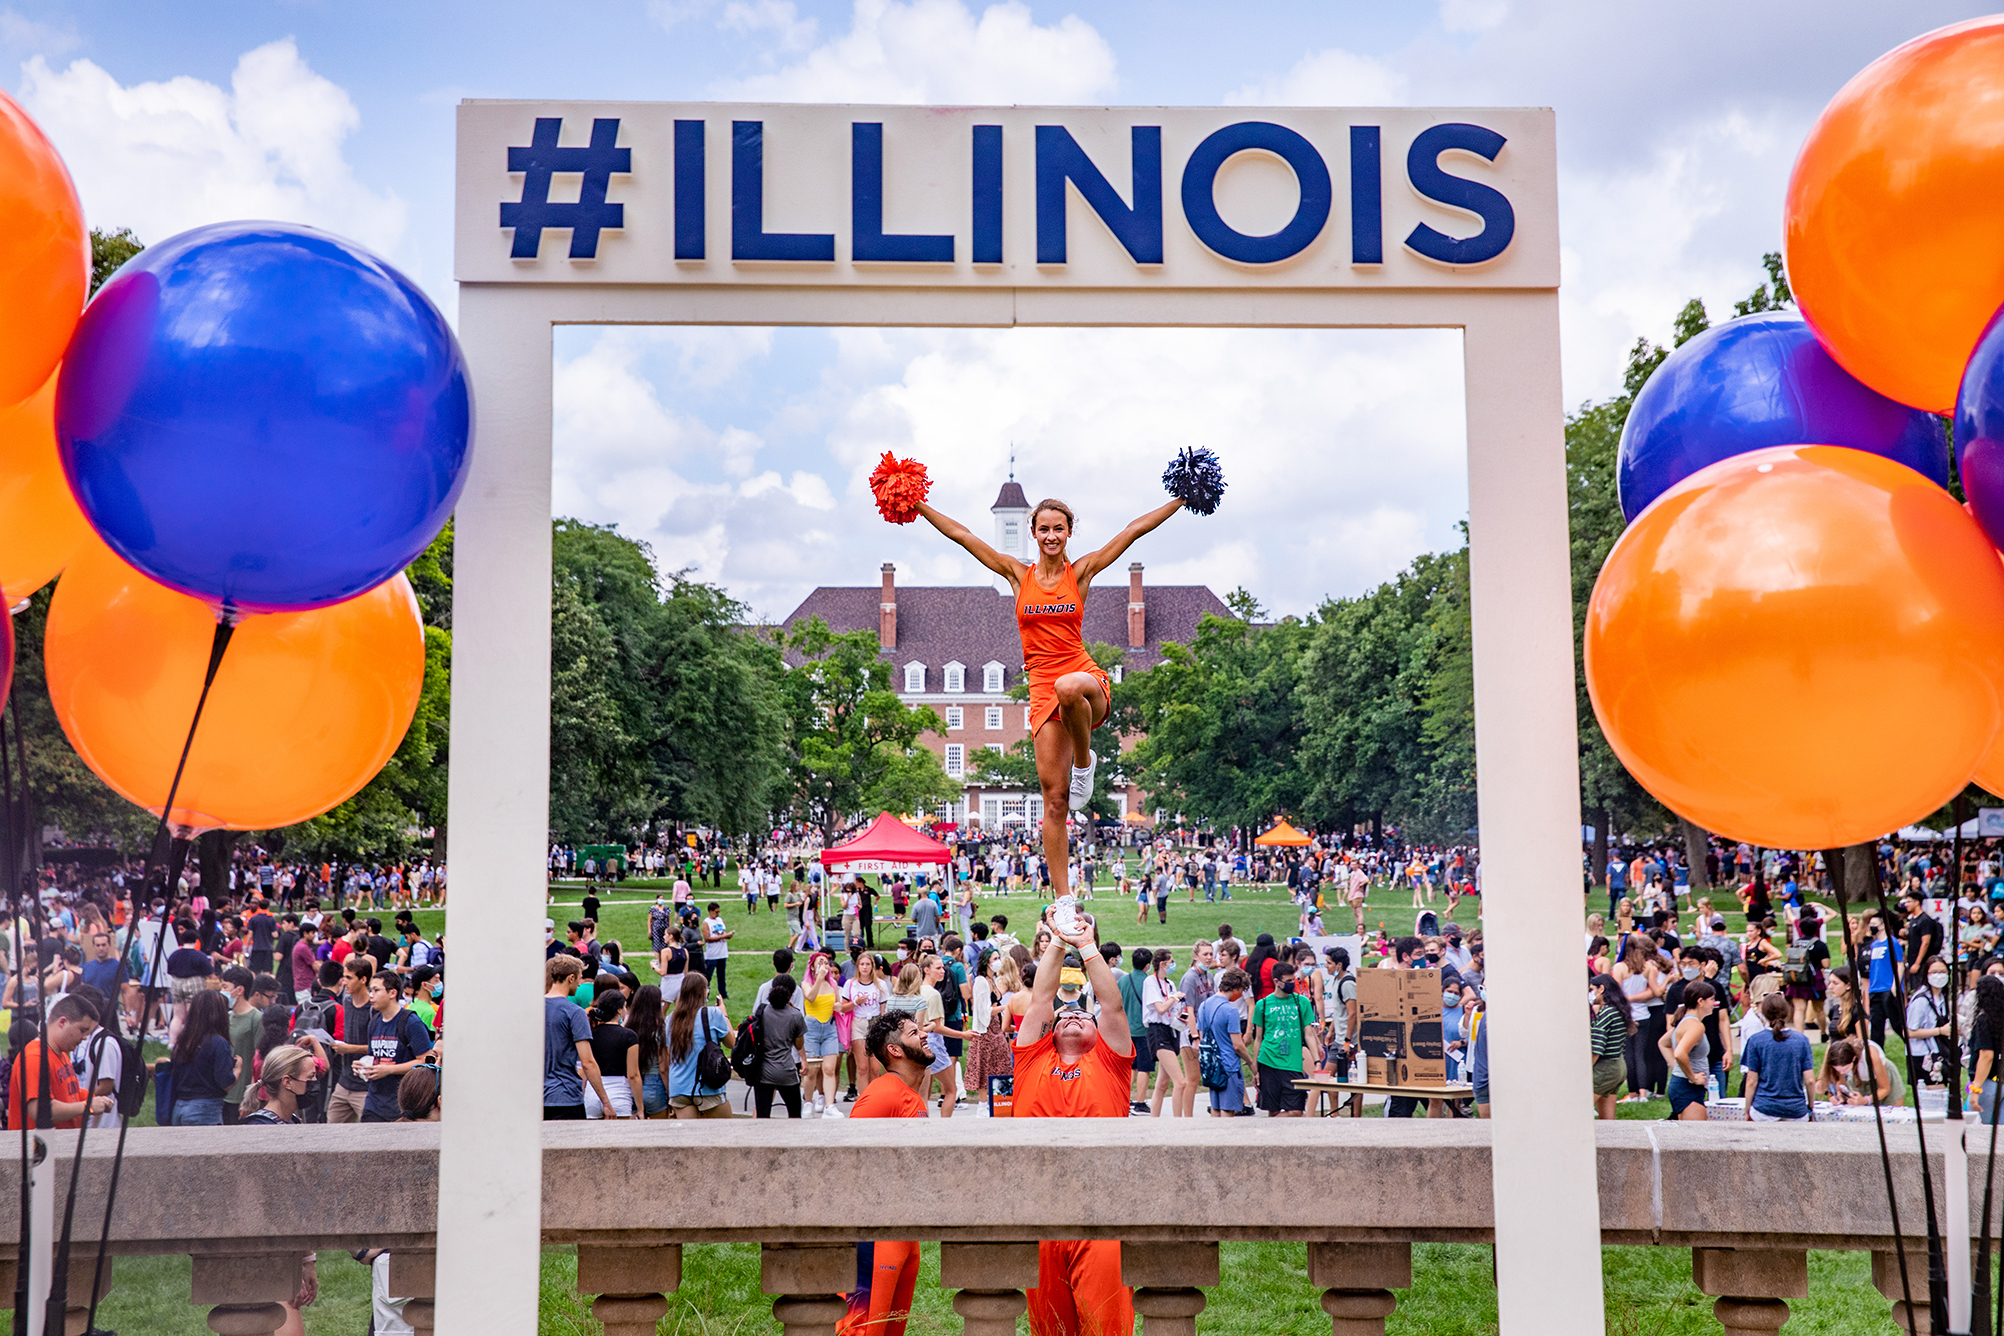 Cheerleaders framed by #Illinois sign overlooking Main Quad with masses of students in background during Quad Day